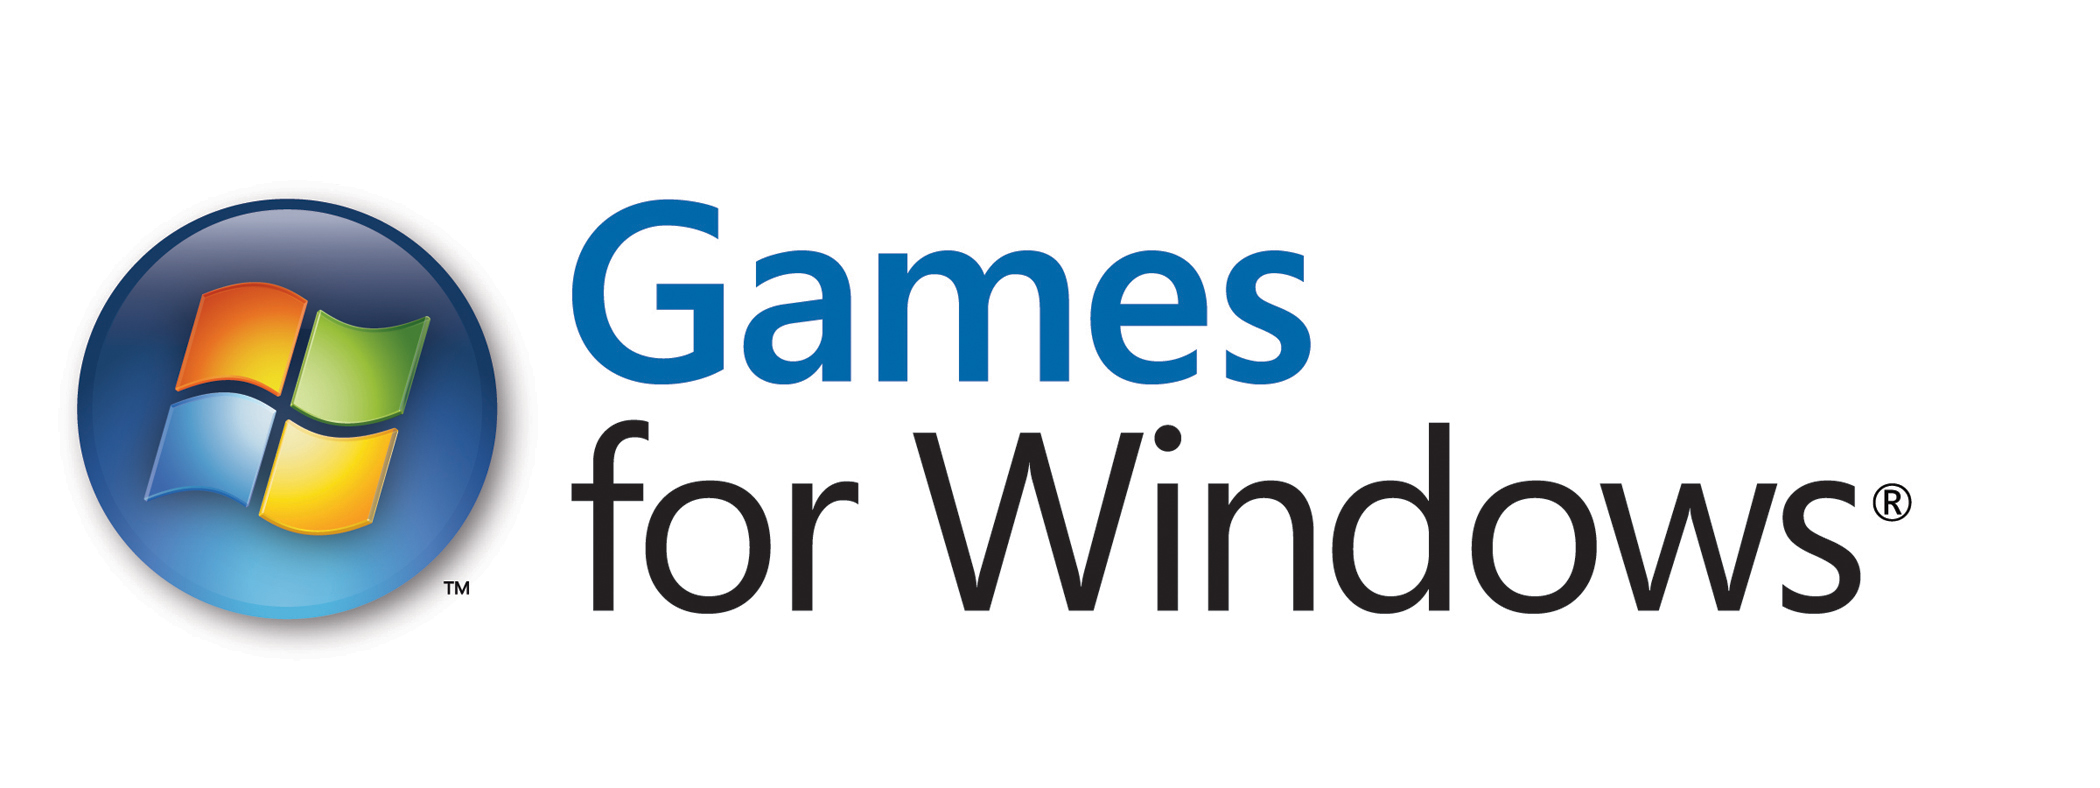 Games windows Icons - Download 875 Free Games windows icons here